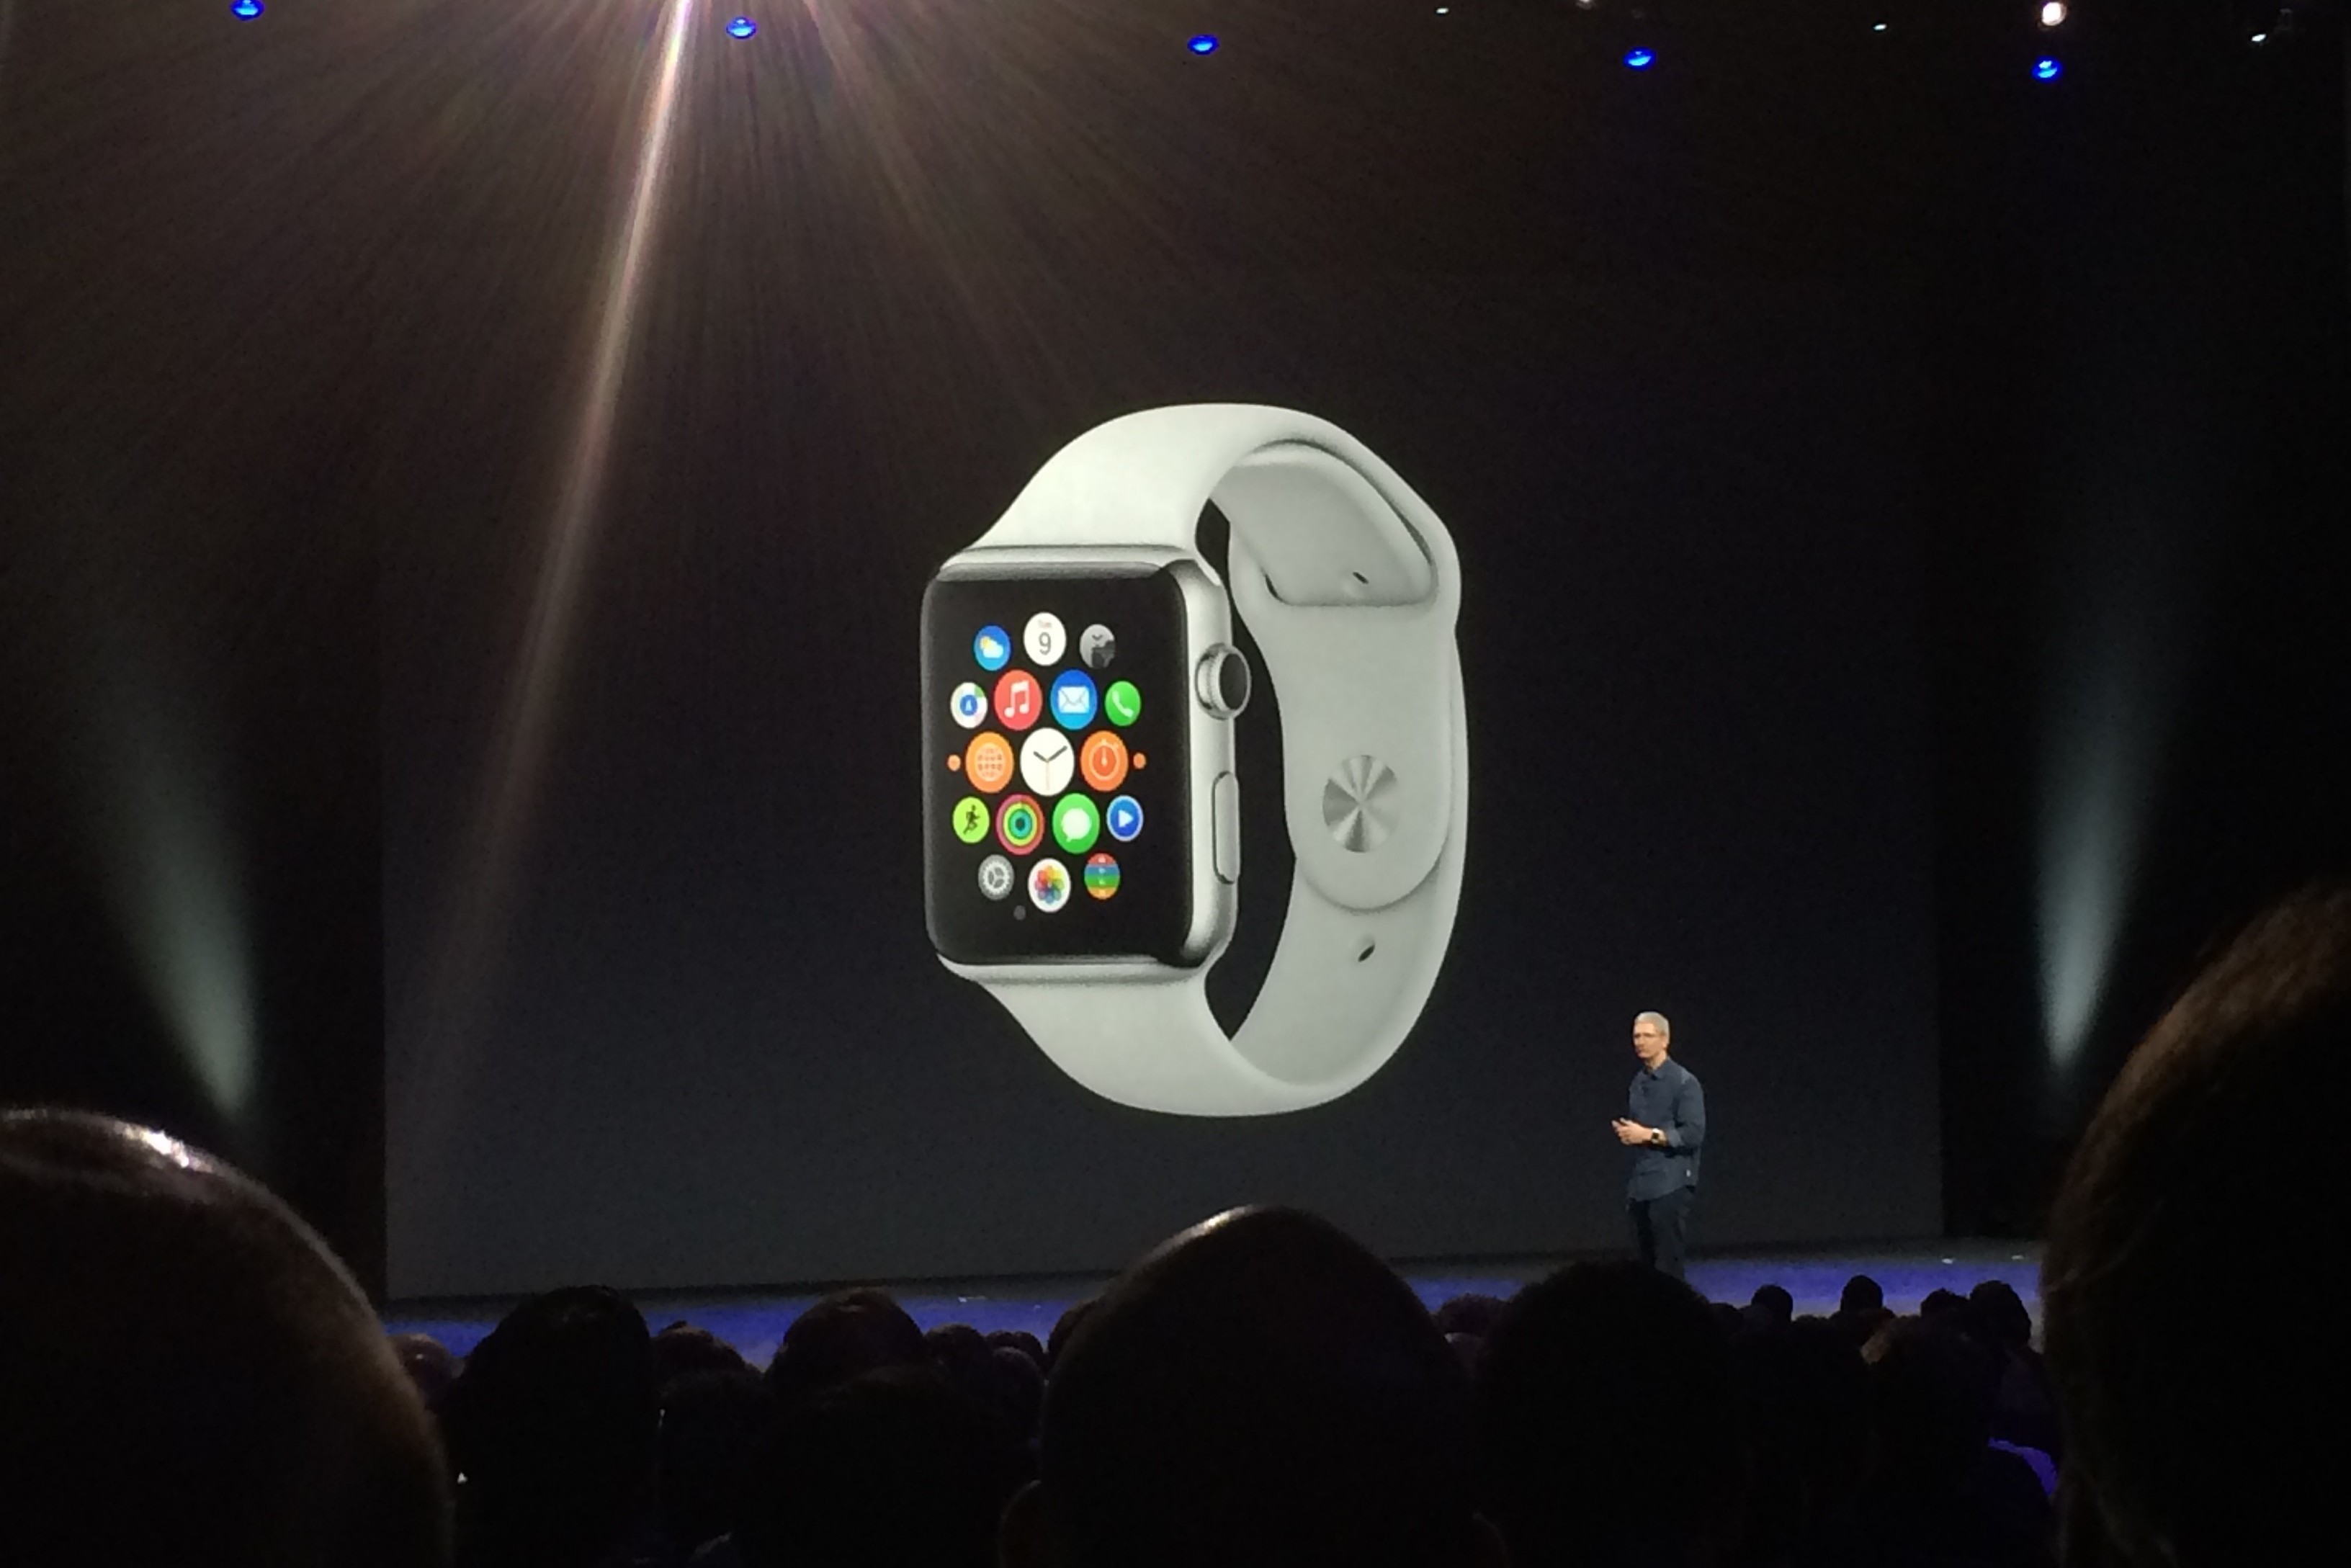 Tim Cook's Keynote on the iWatch or rather the Apple Watch